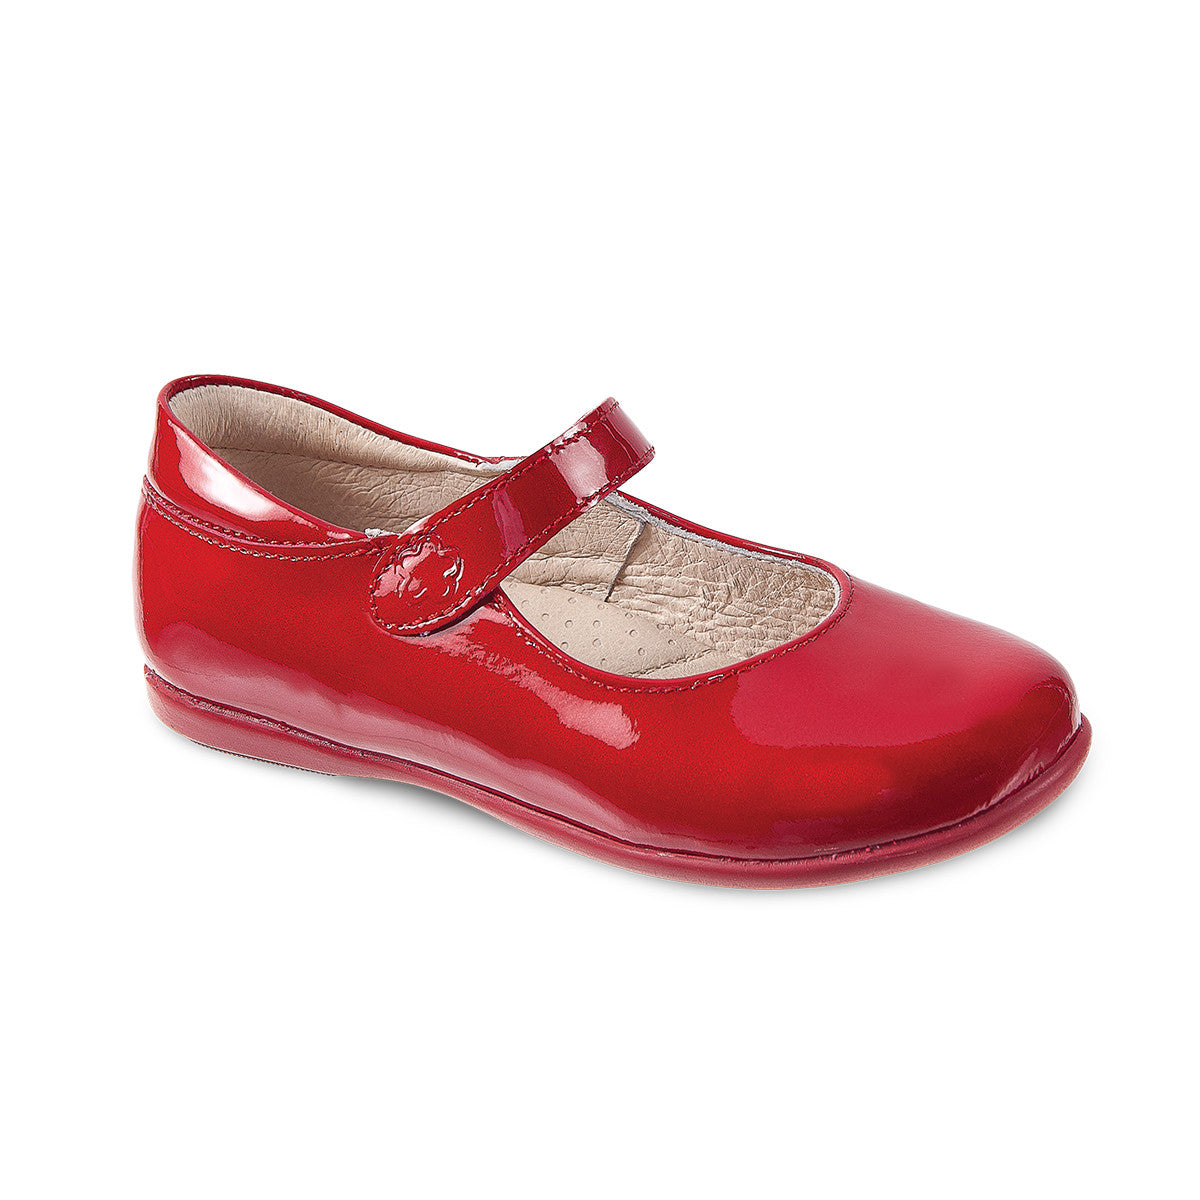 red patent shoes kids